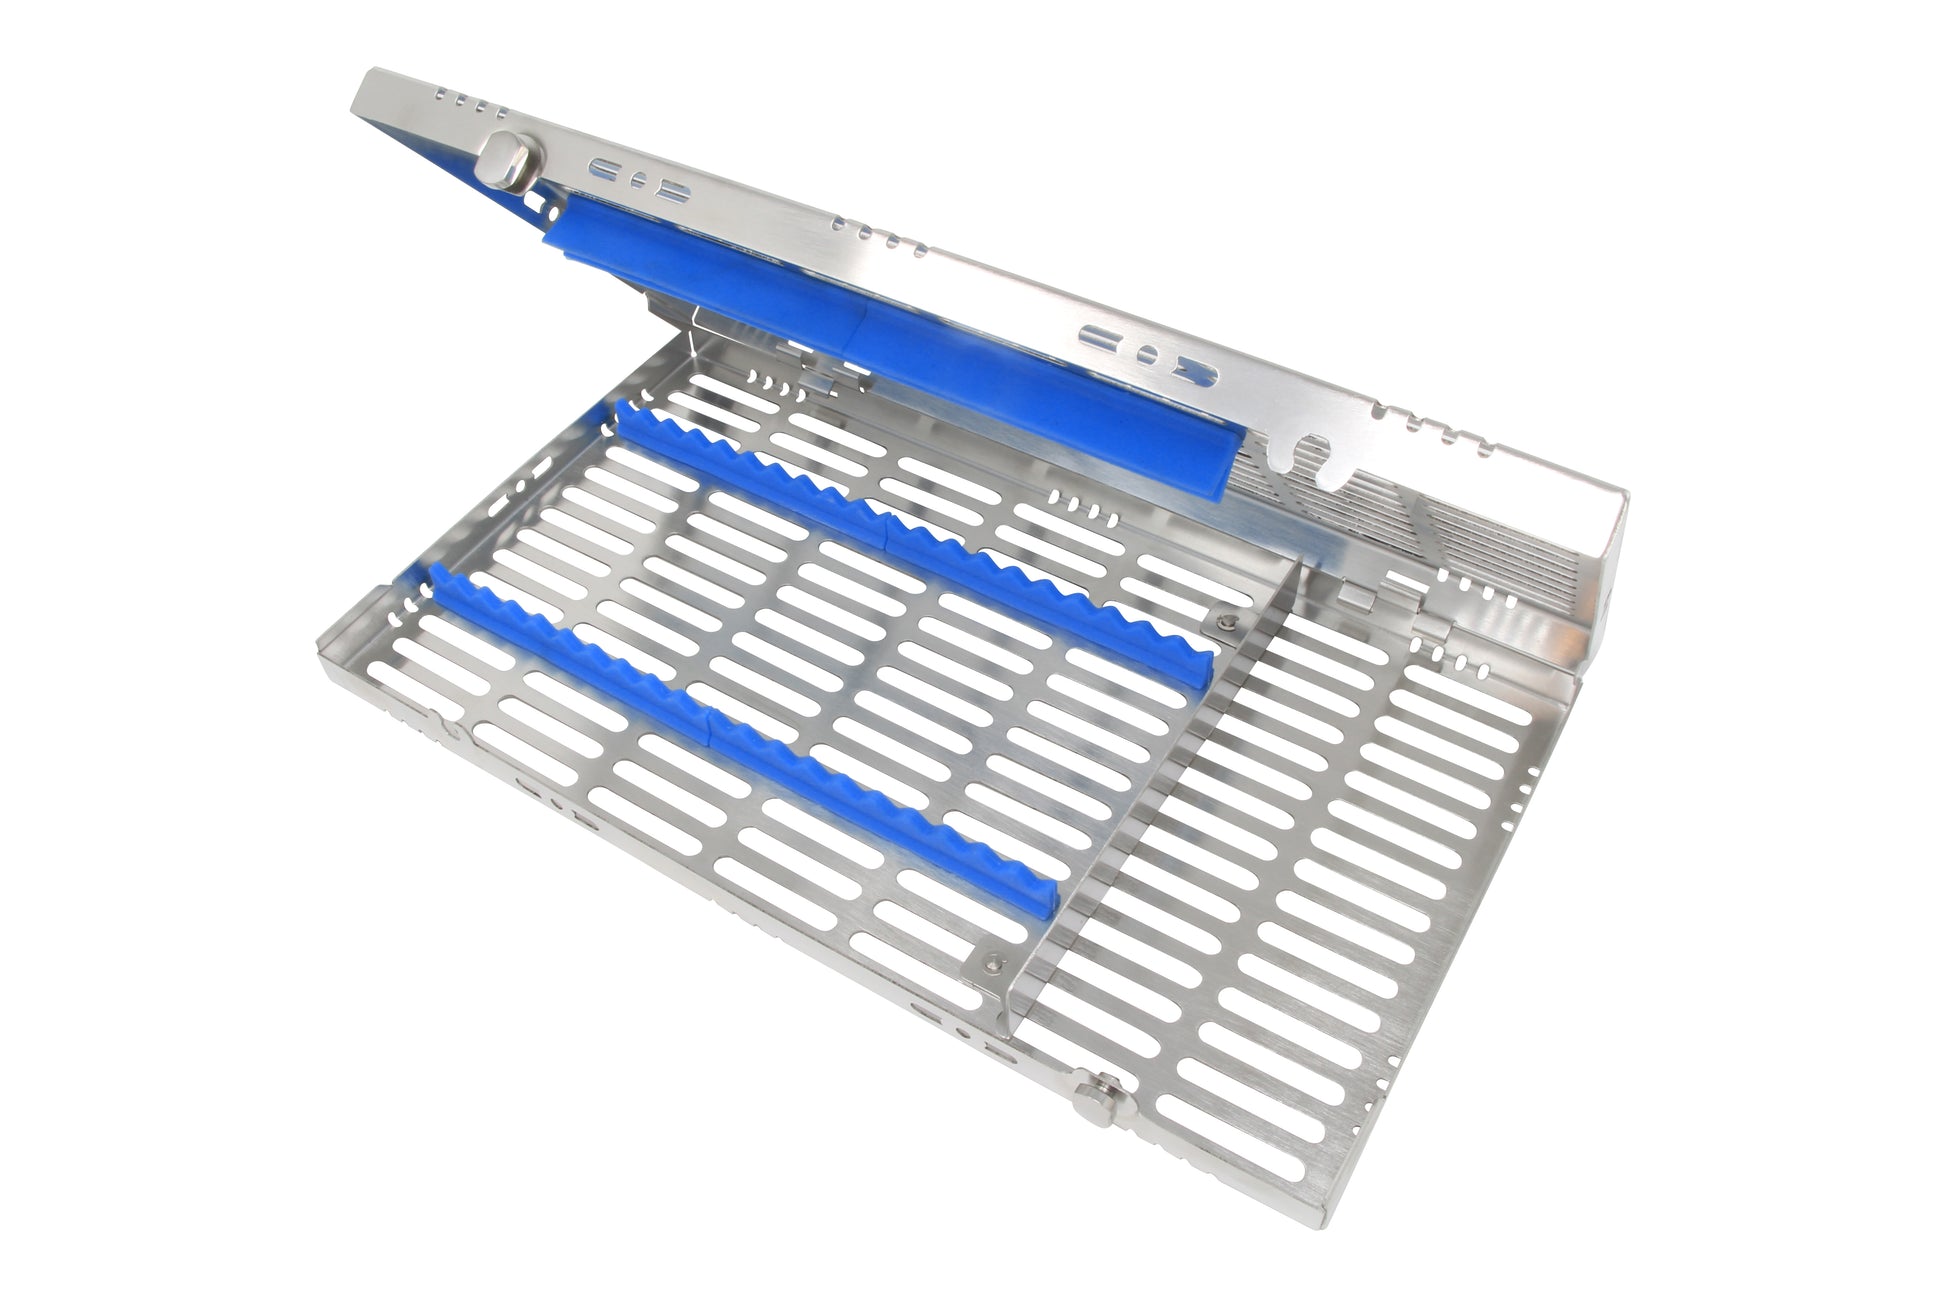 Sterilization Cassette for 20 Instruments, With Adjustable Accessory Area - 370x202x30, Detachable - HiTeck Medical Instruments